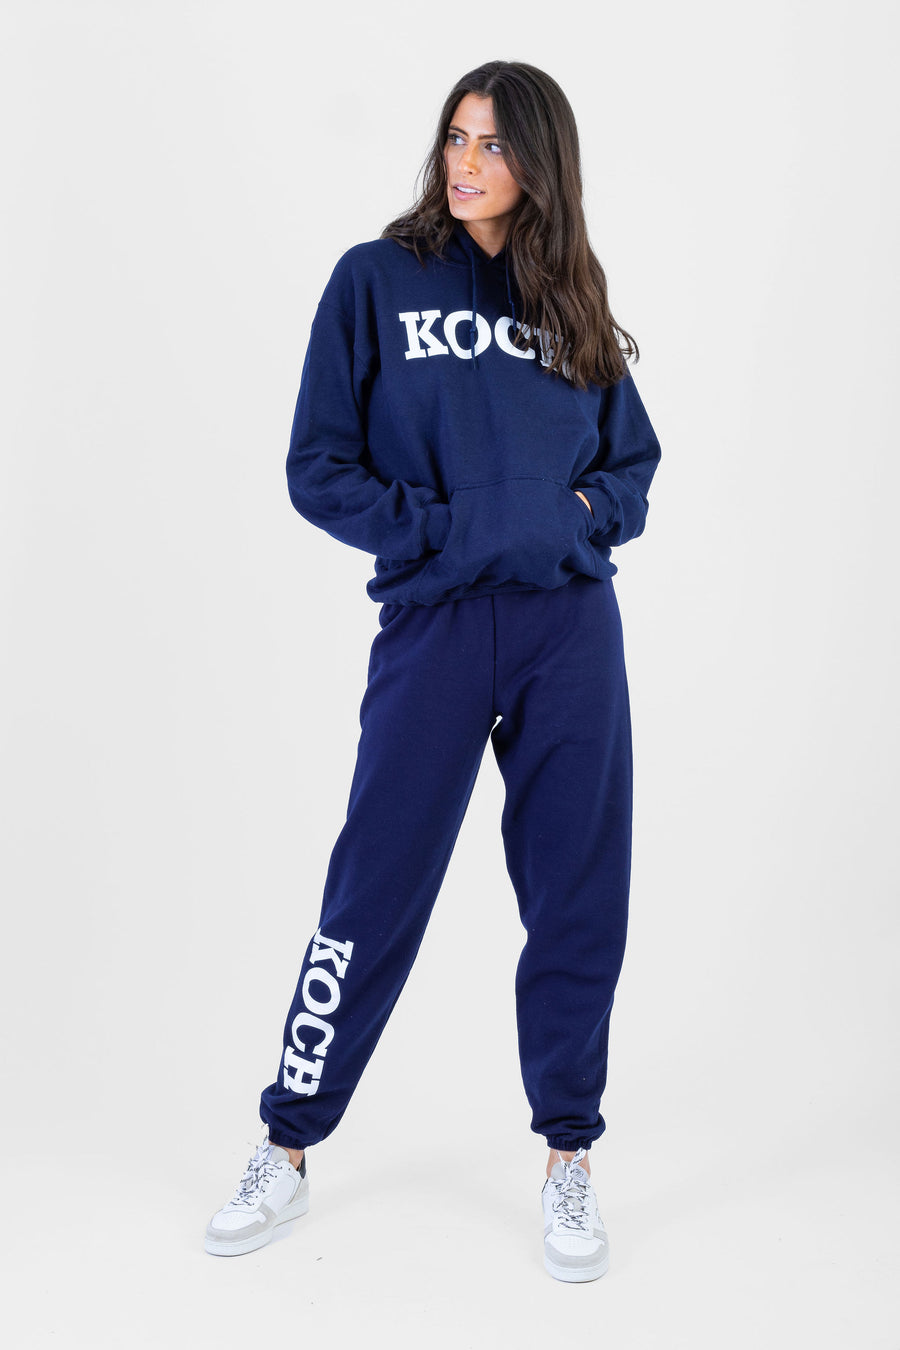 KOCH Grace Hoodie Navy *Limited*Edition*